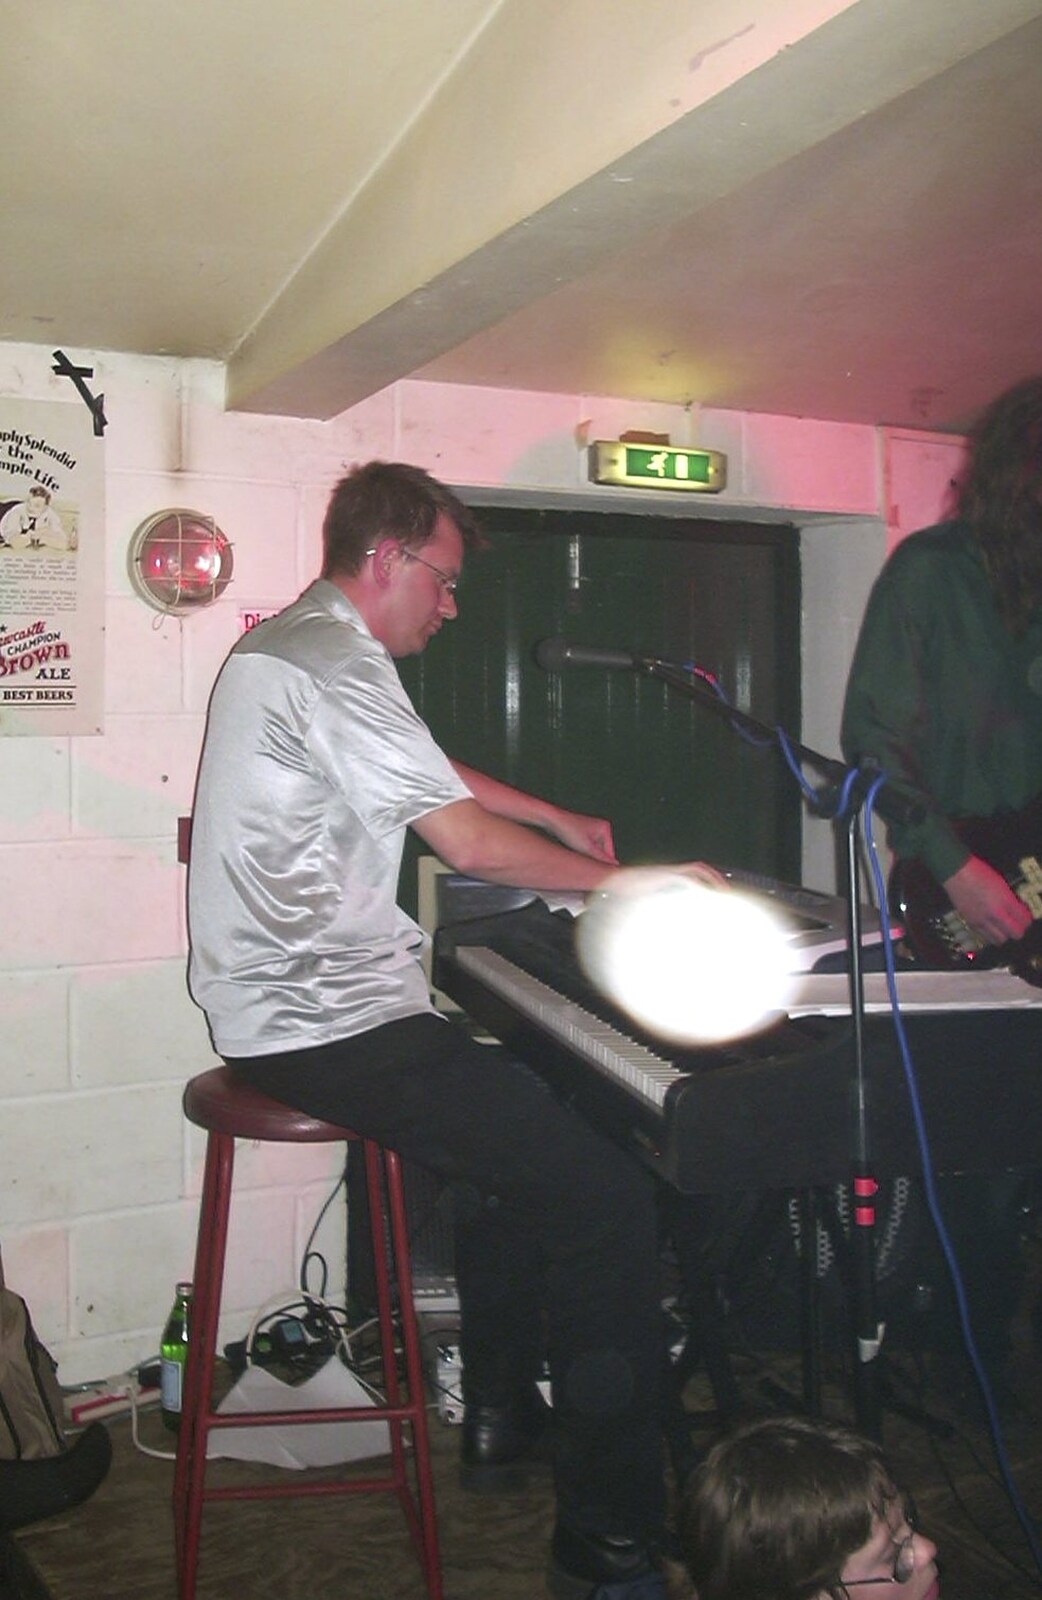 Nosher on keyboards from The BBs at the Cider Shed, Banham, Norfolk - 23rd June 2003